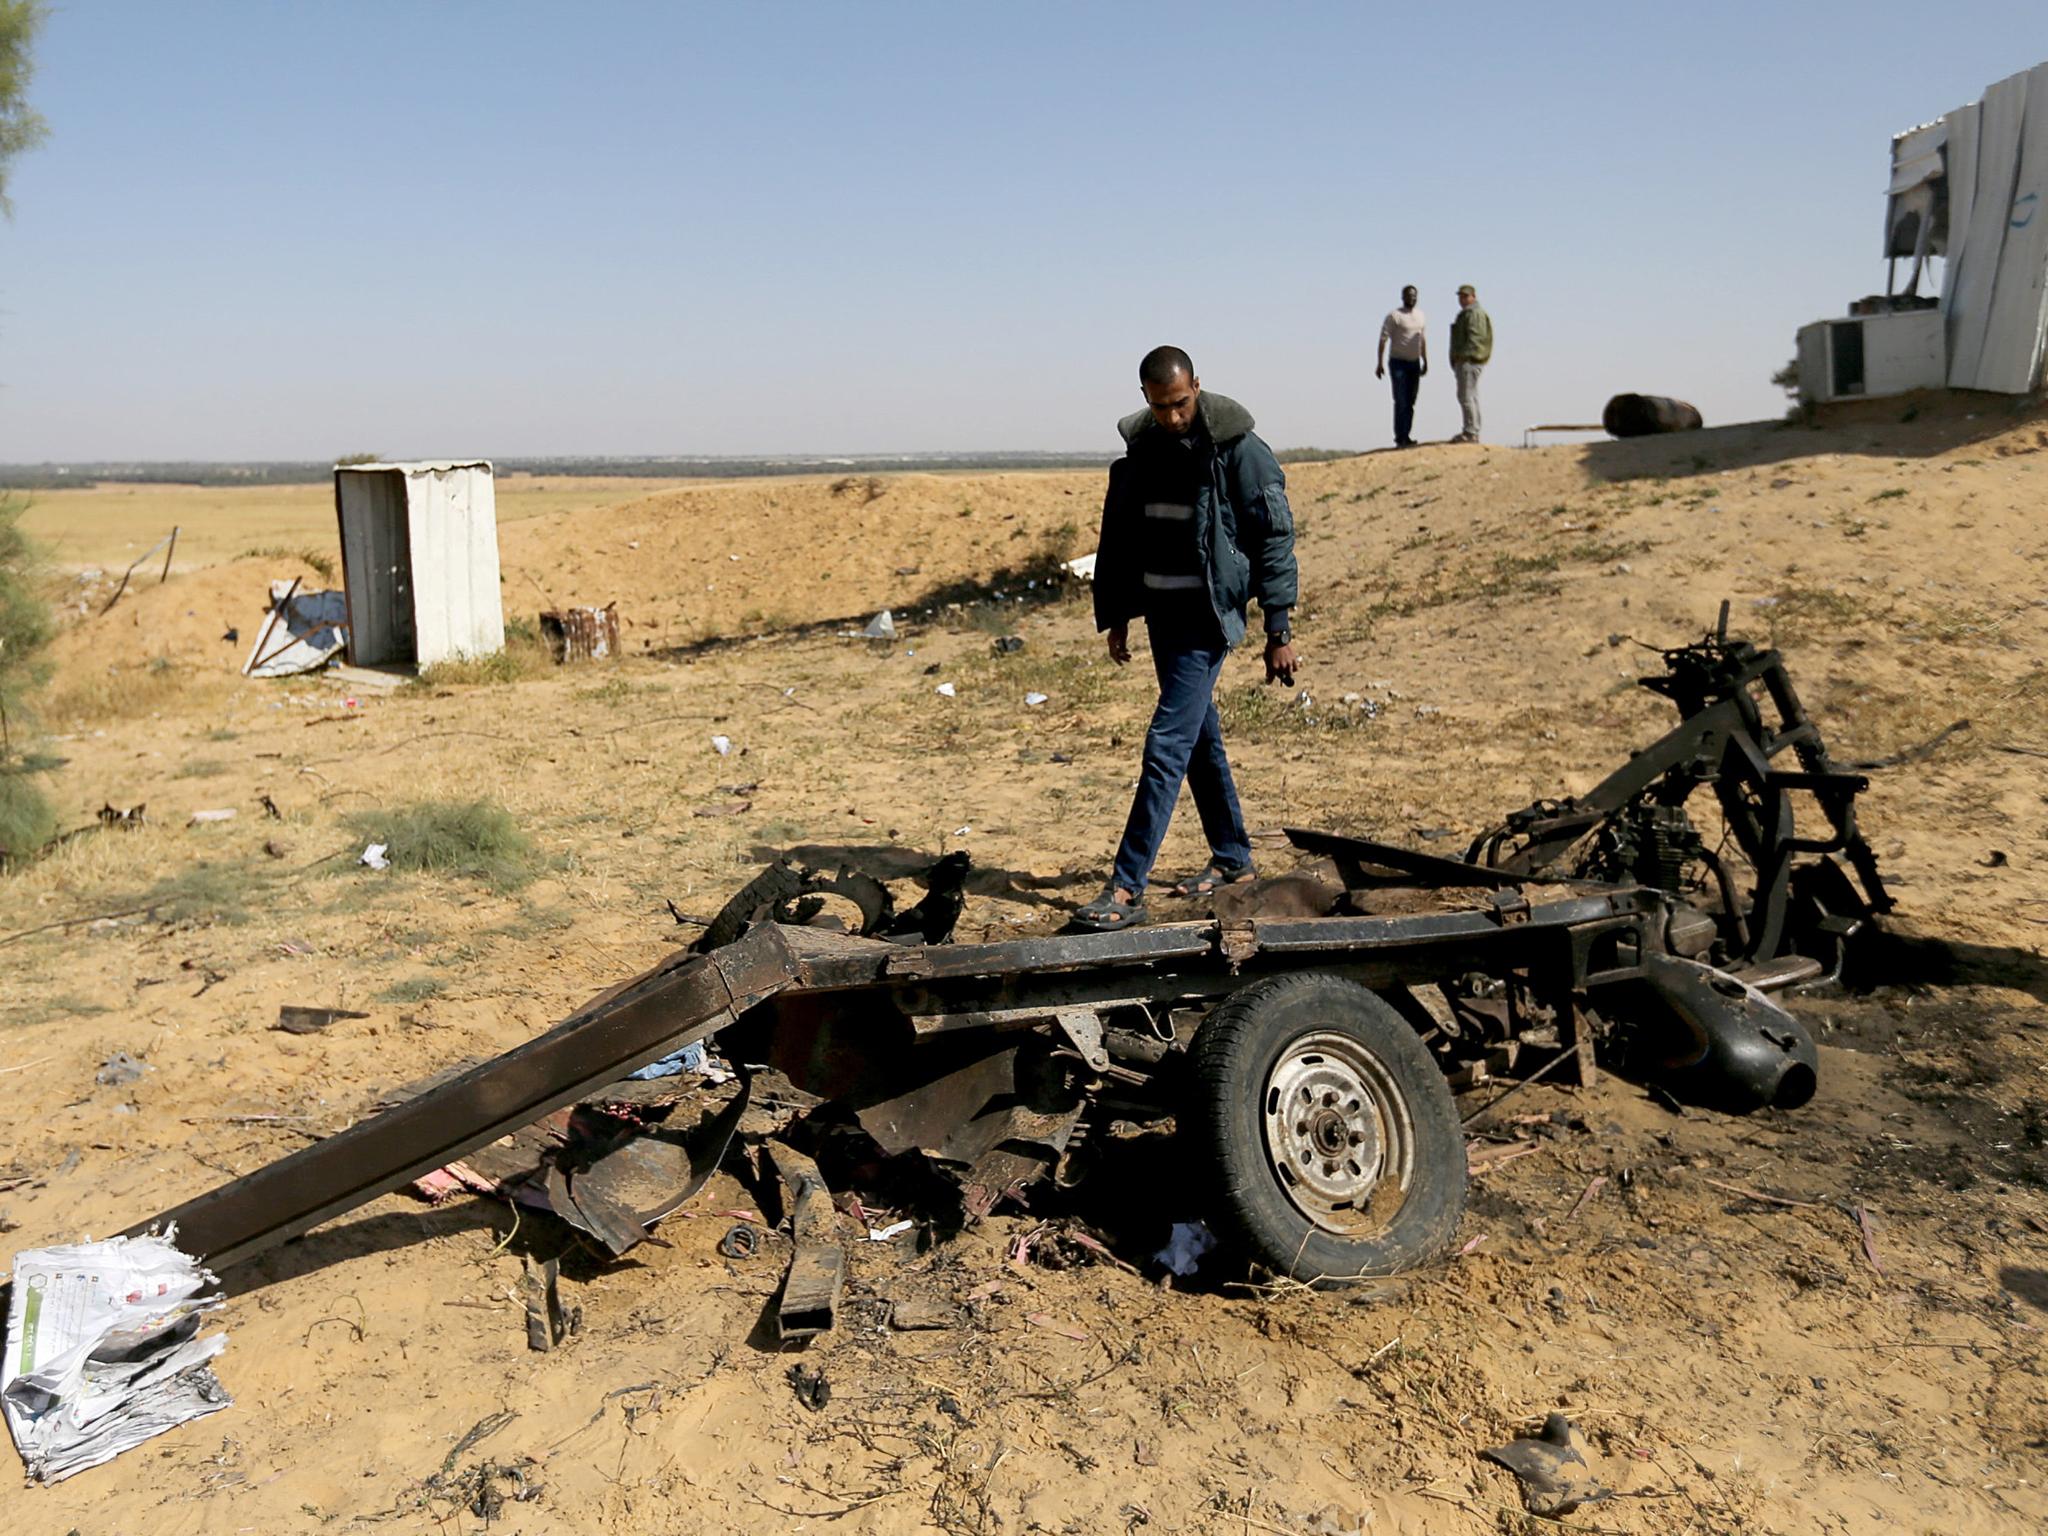 The explosion hit a three-wheeled vehicle near Palestinian protest camps